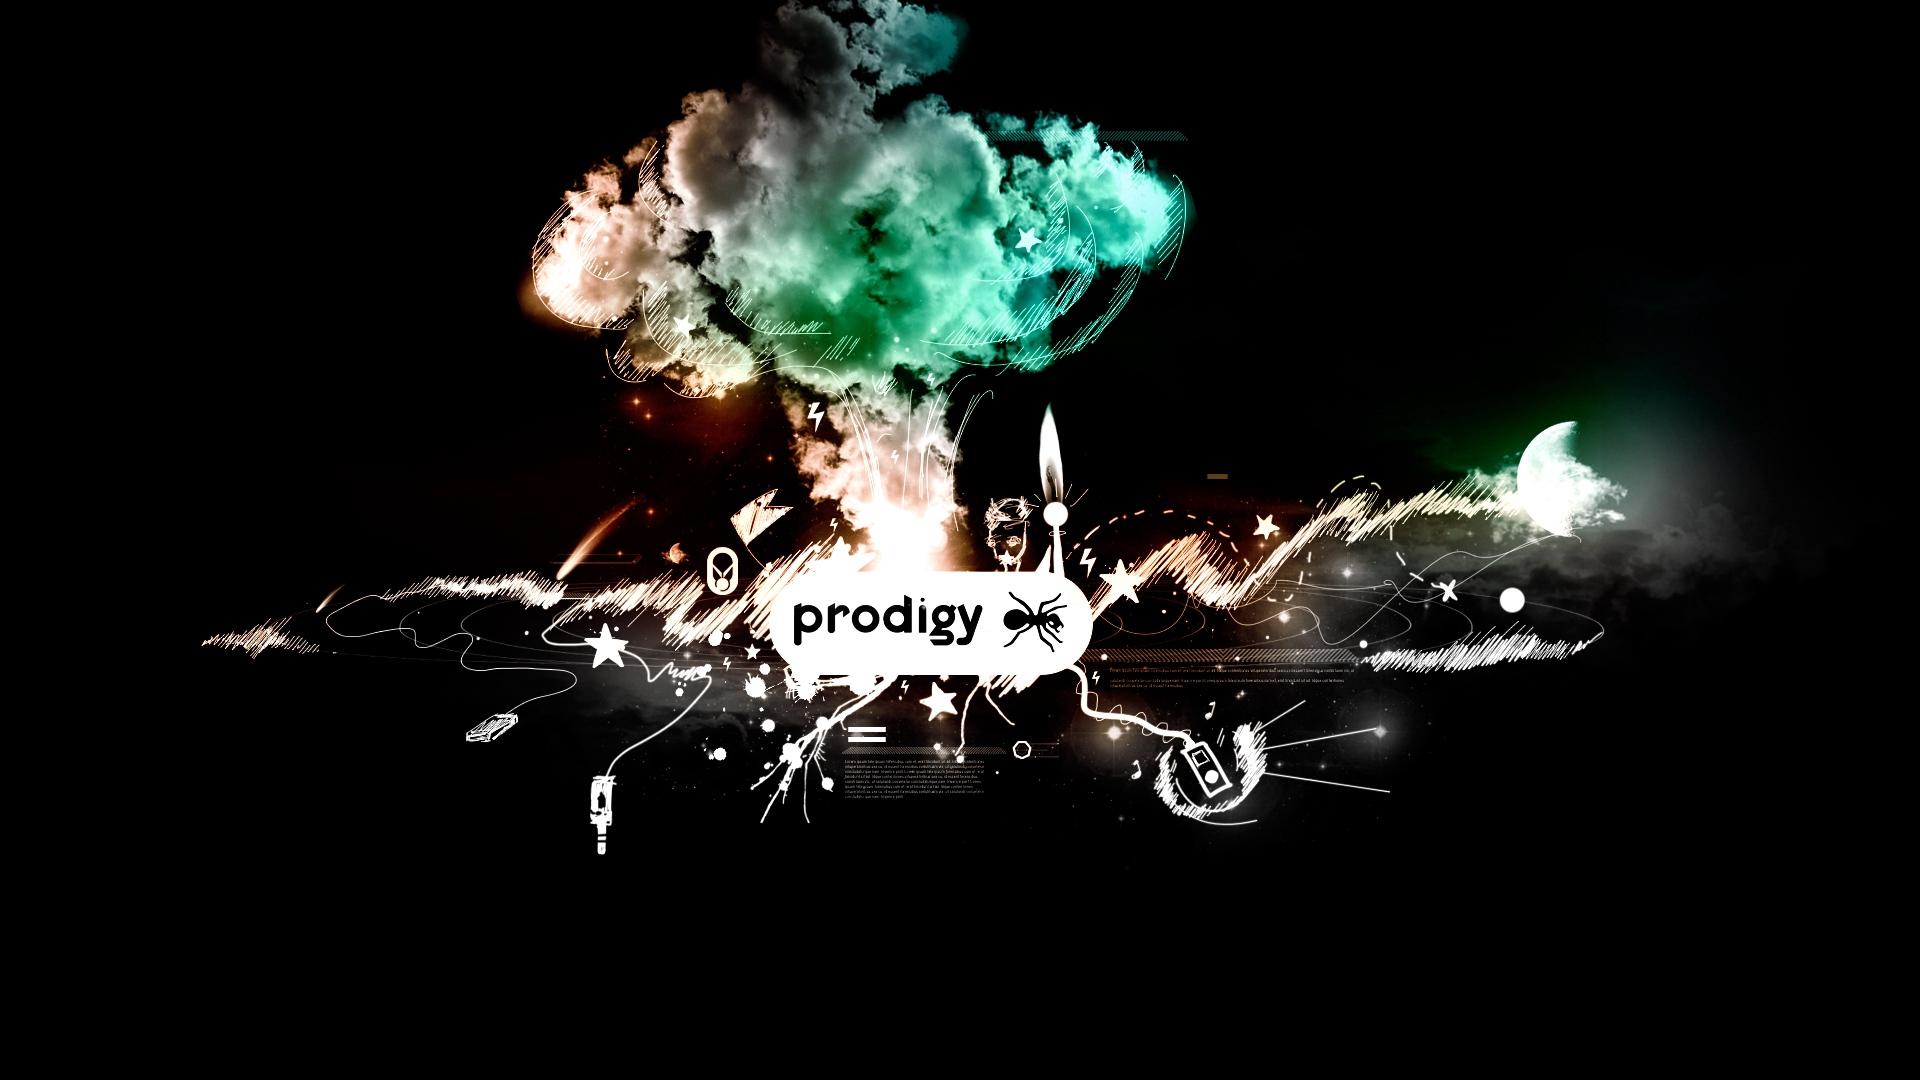 Download wallpaper 1920x1080 the prodigy, gralhics, ant, items